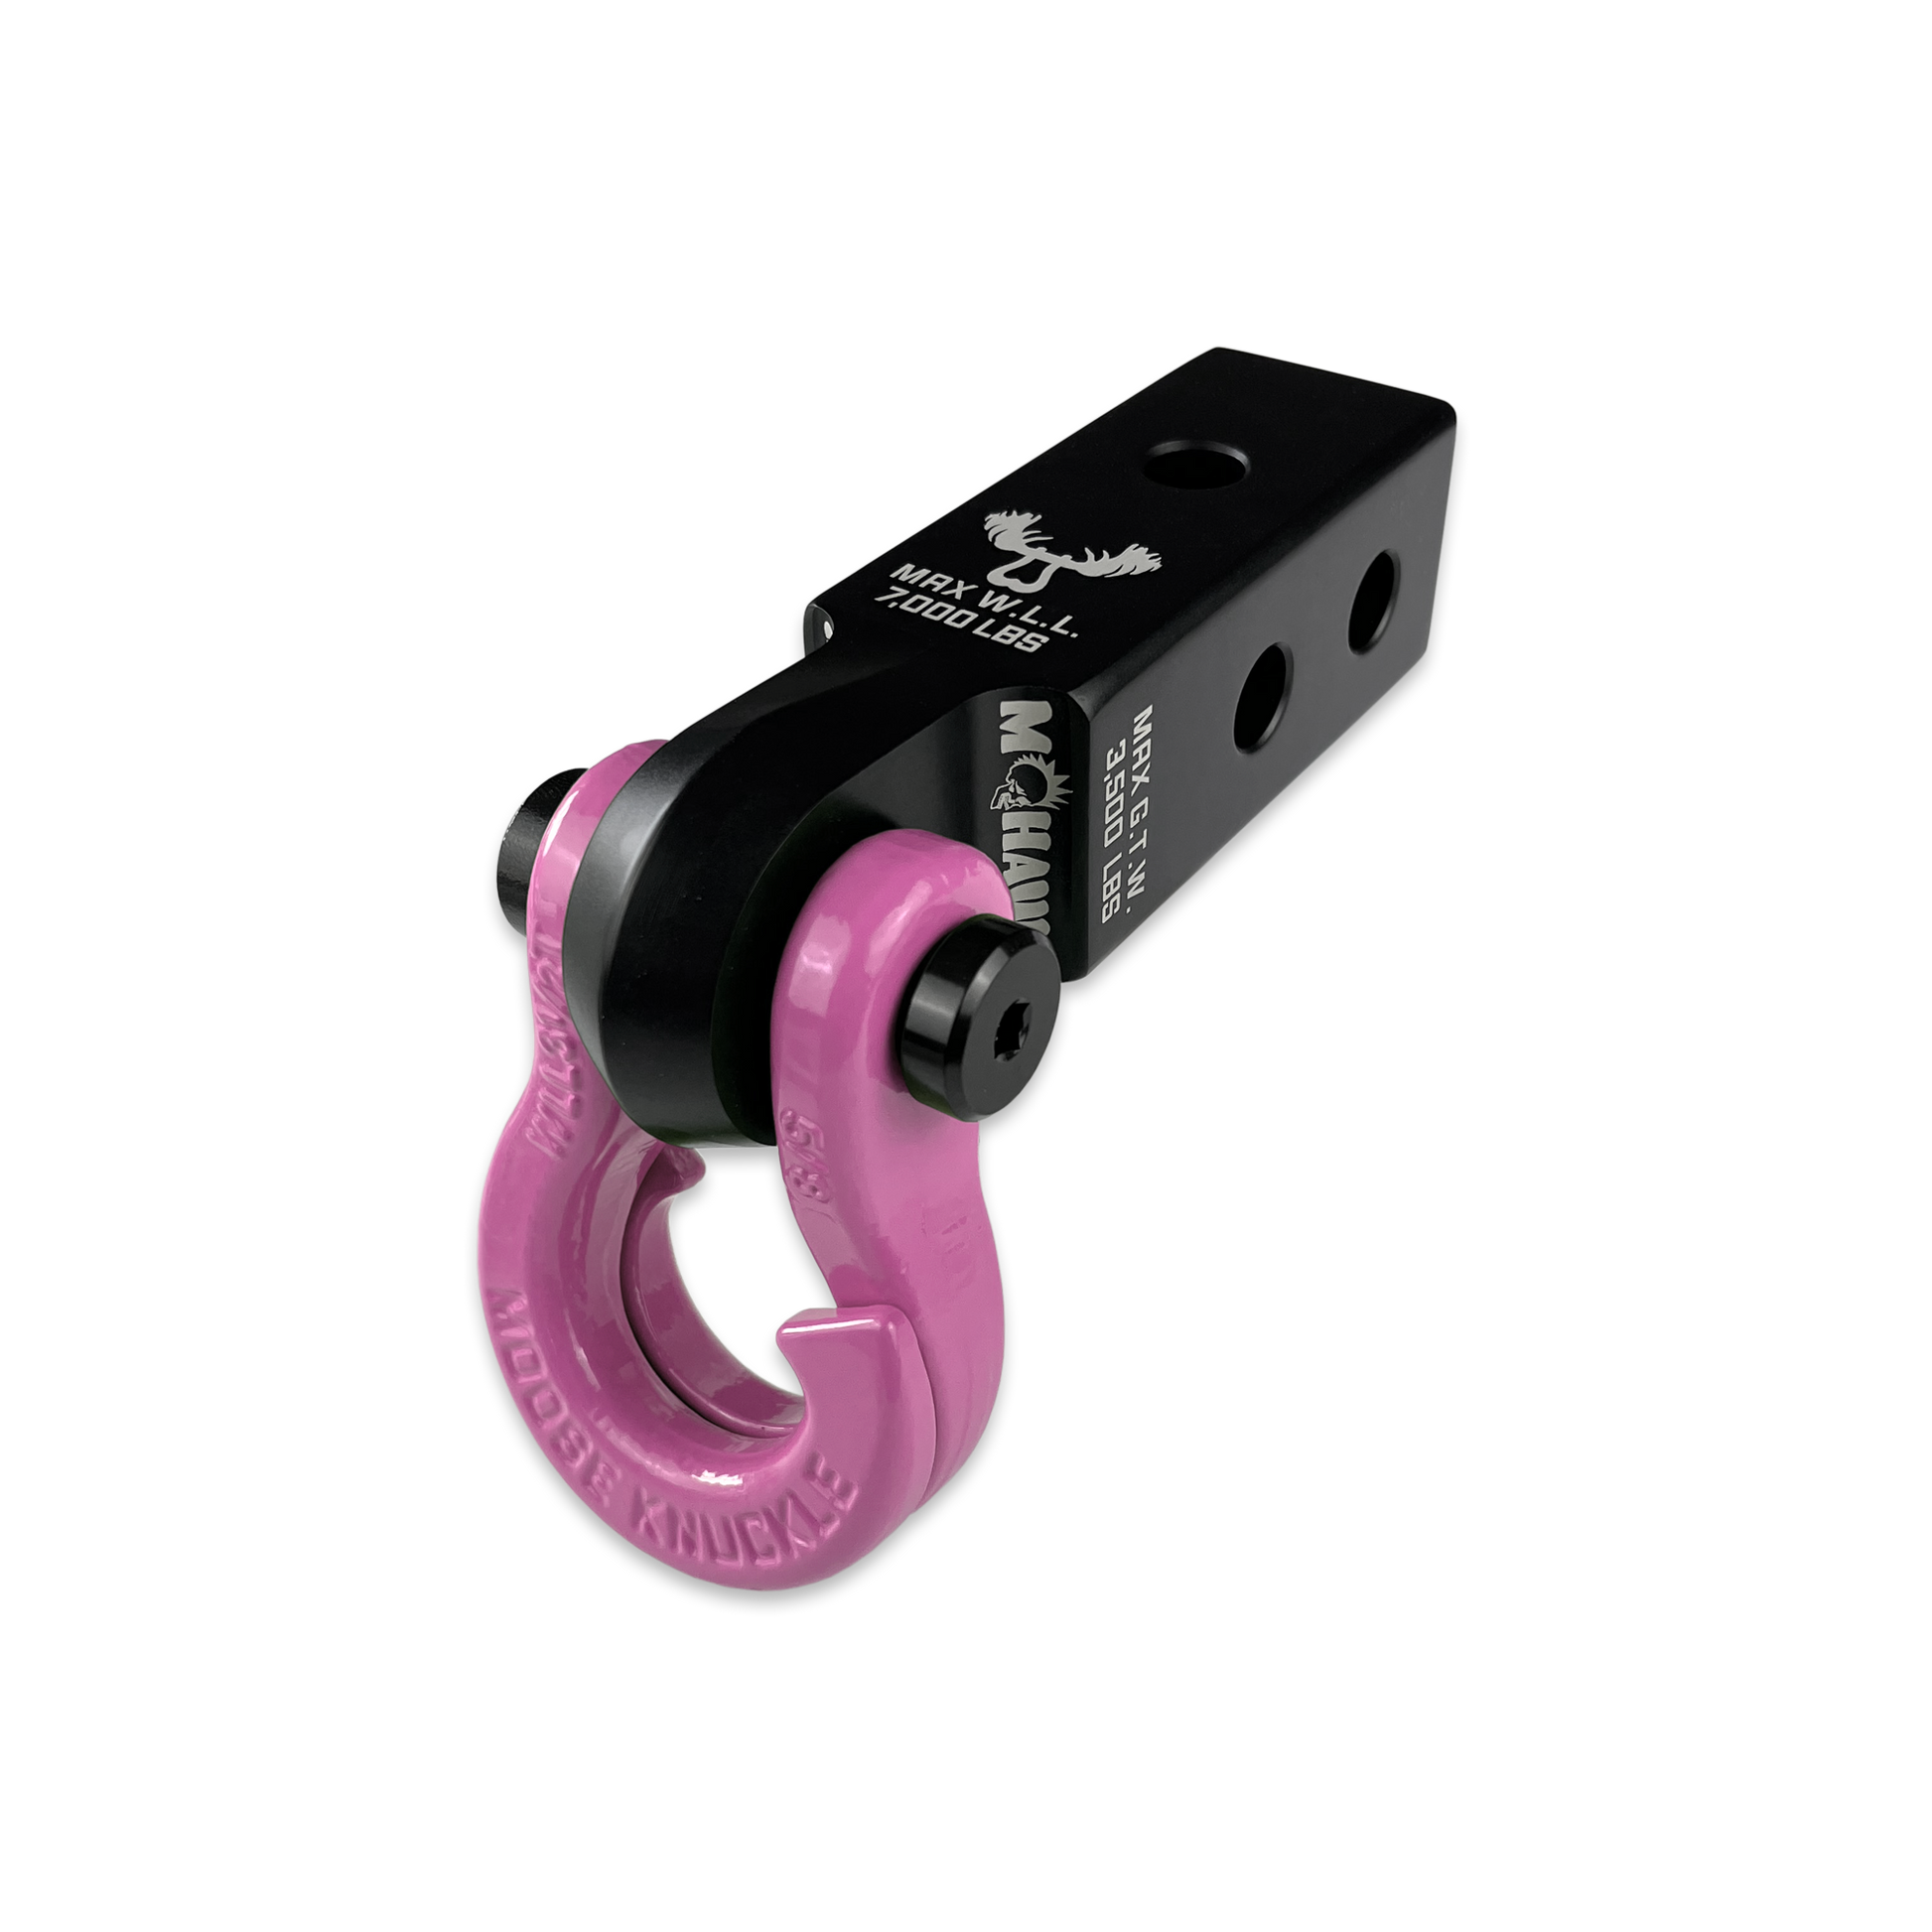 Jowl 5/8 Split Shackle & Mohawk 2.0 X 5/8 Receiver (Black Lung and Pretty Pink)